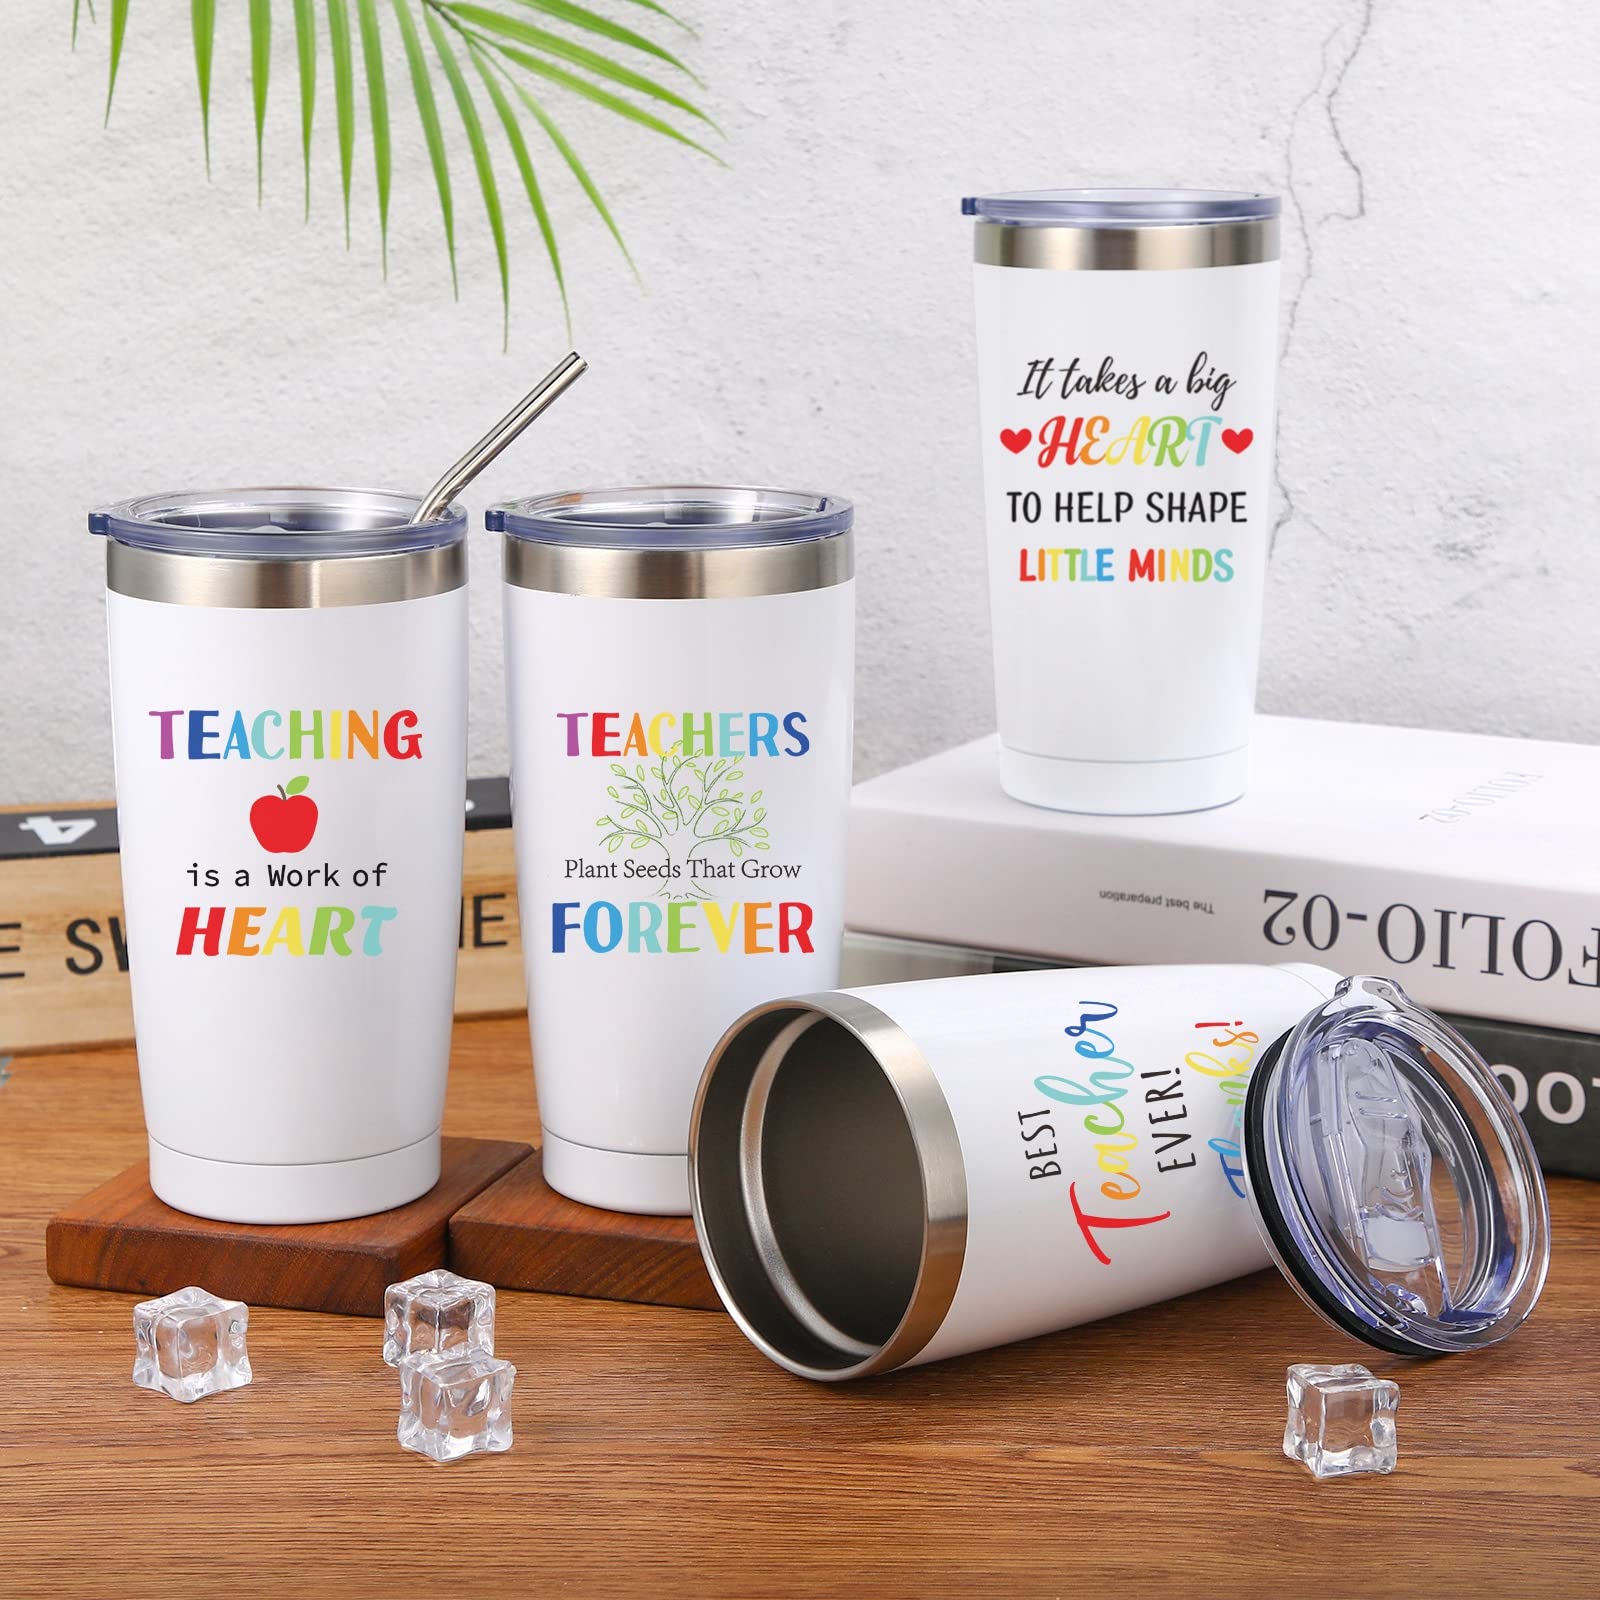 Patelai 4 Pcs Teacher Appreciation Gifts Best Teacher Birthday Gifts Stainless Steel Insulated Tumblers Set Funny Thank You Tumbler Coffee Mugs for Graduation Teachers' Day Present (White)